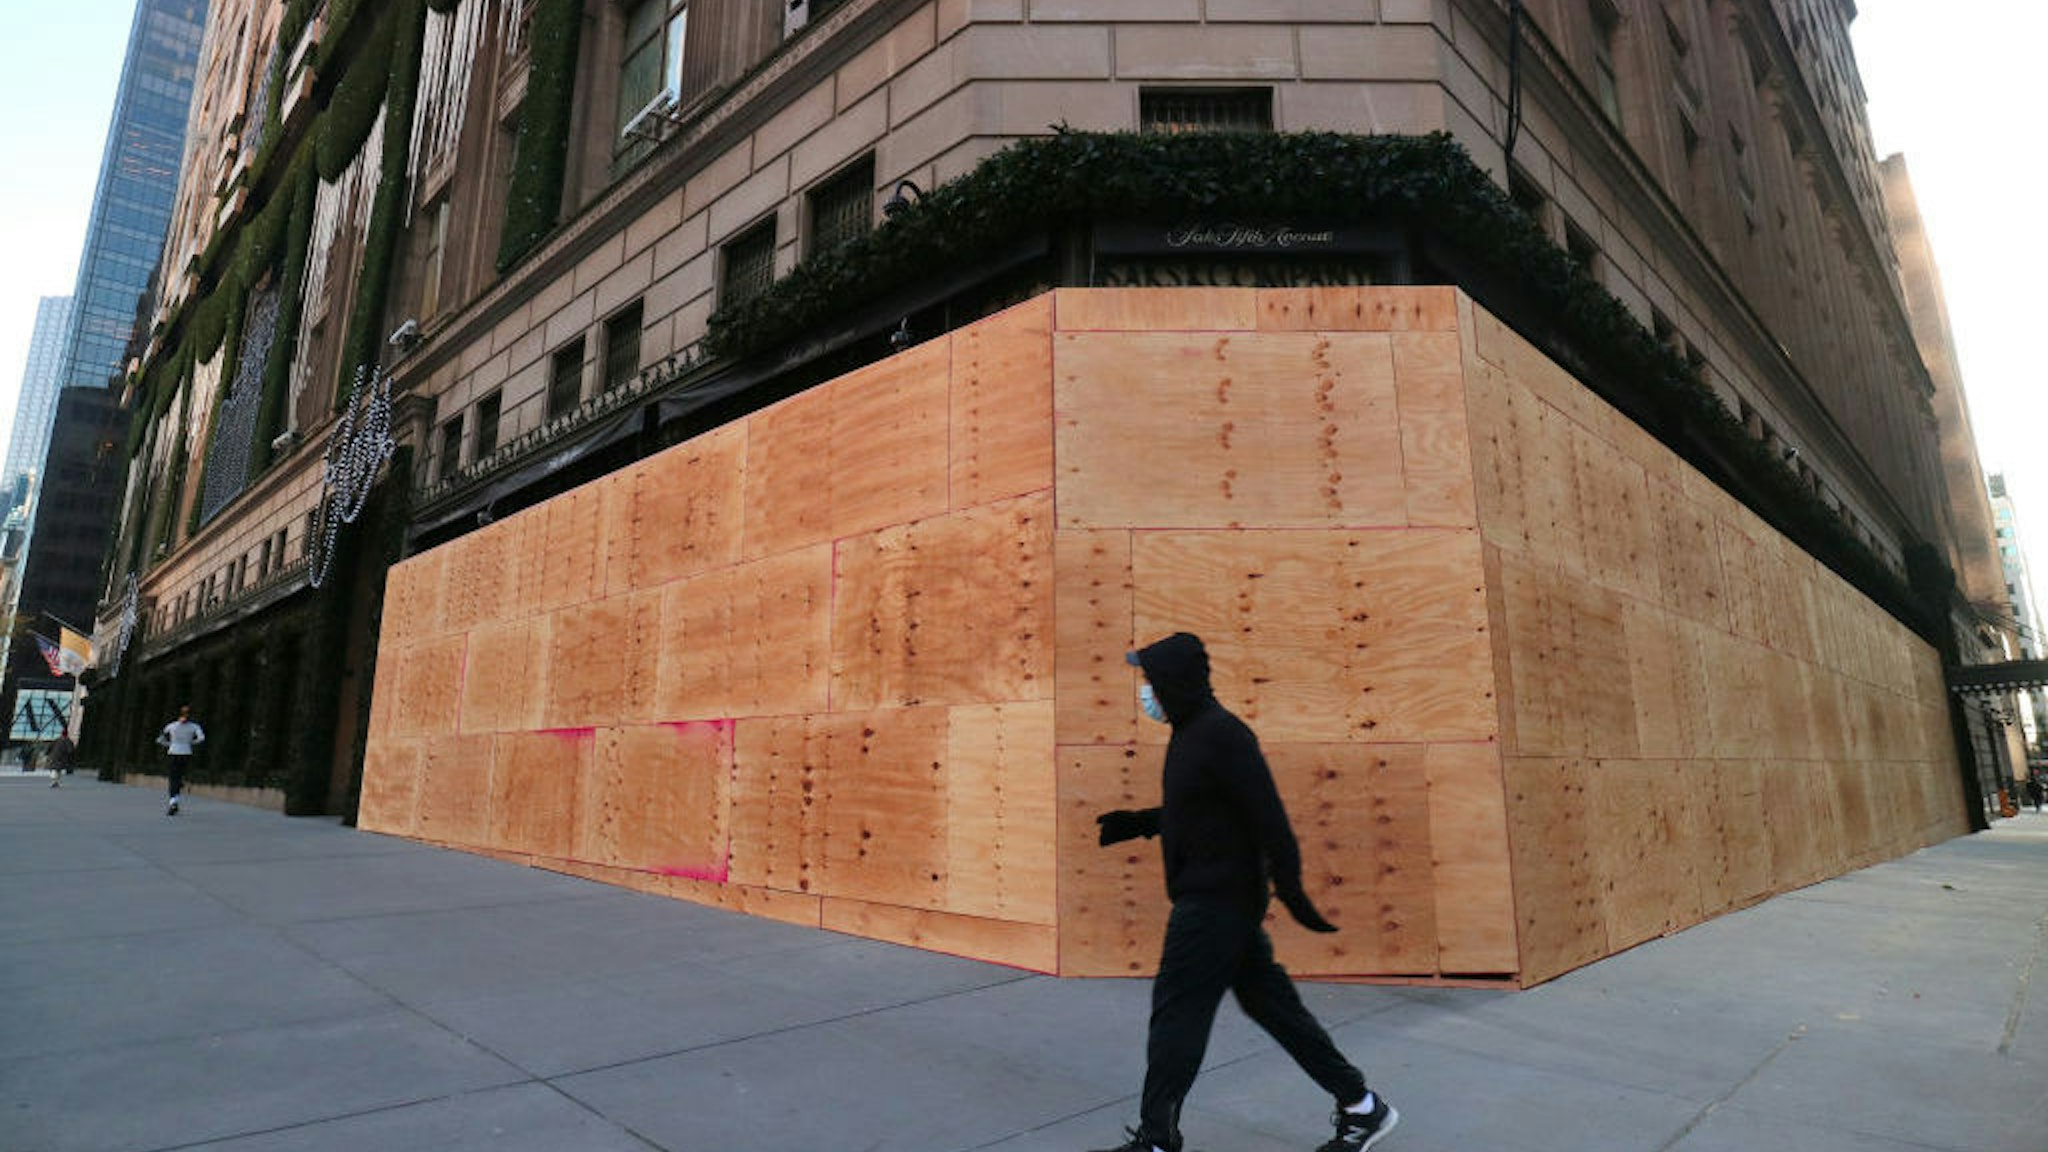 NEW YORK, NY - OCTOBER 31: A person walks past a boarded up entrance and windows of the Saks Fifth Avenue store on Fifth Avenue ahead of expected election day protests on October 31, 2020 in New York City. (Photo by Gary Hershorn/Getty Images)